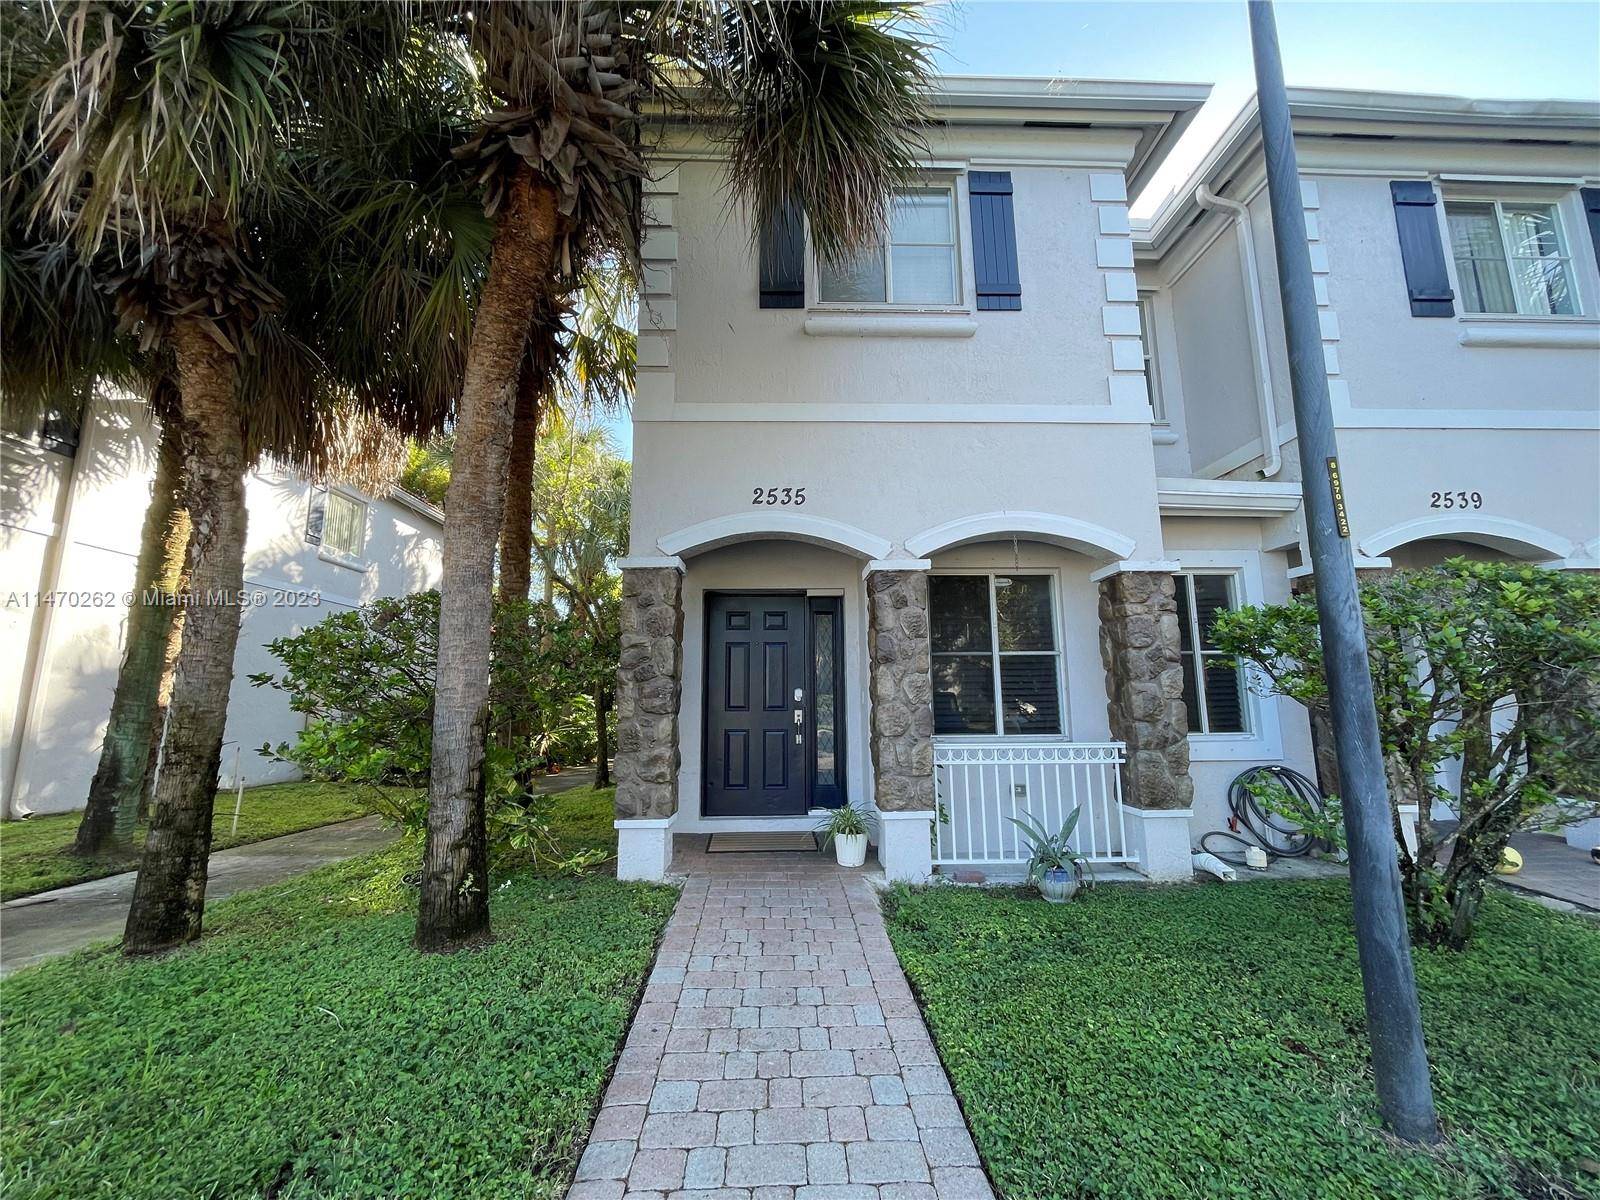 Beautifully updated 3 bedroom, 2 ½ bath corner townhome located in the private gated community of Tuscany in Miramar.